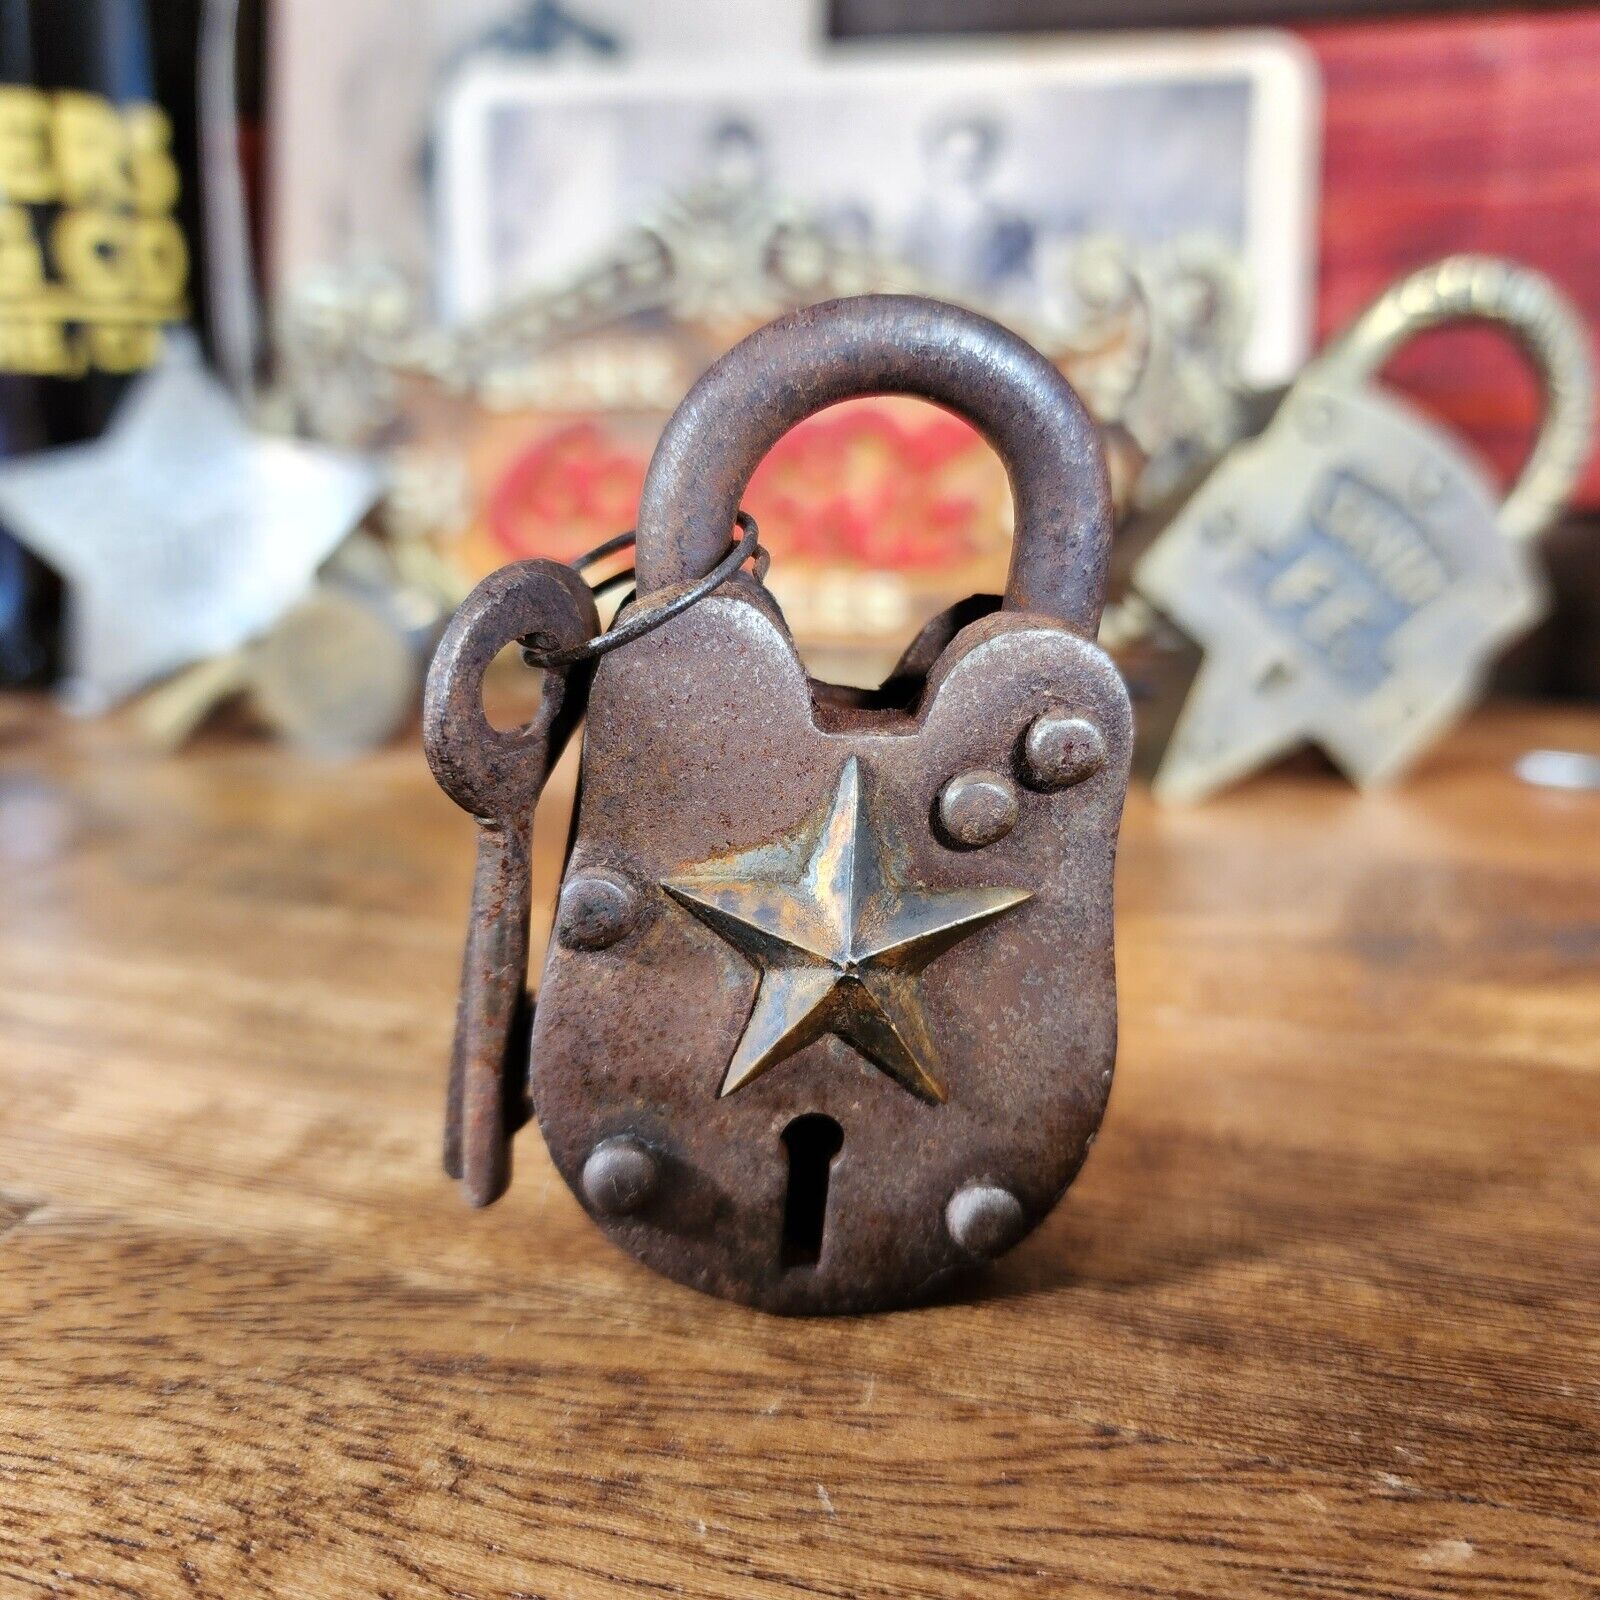 Lone Star Texas Gate Lock With Working Keys & Antique Finish